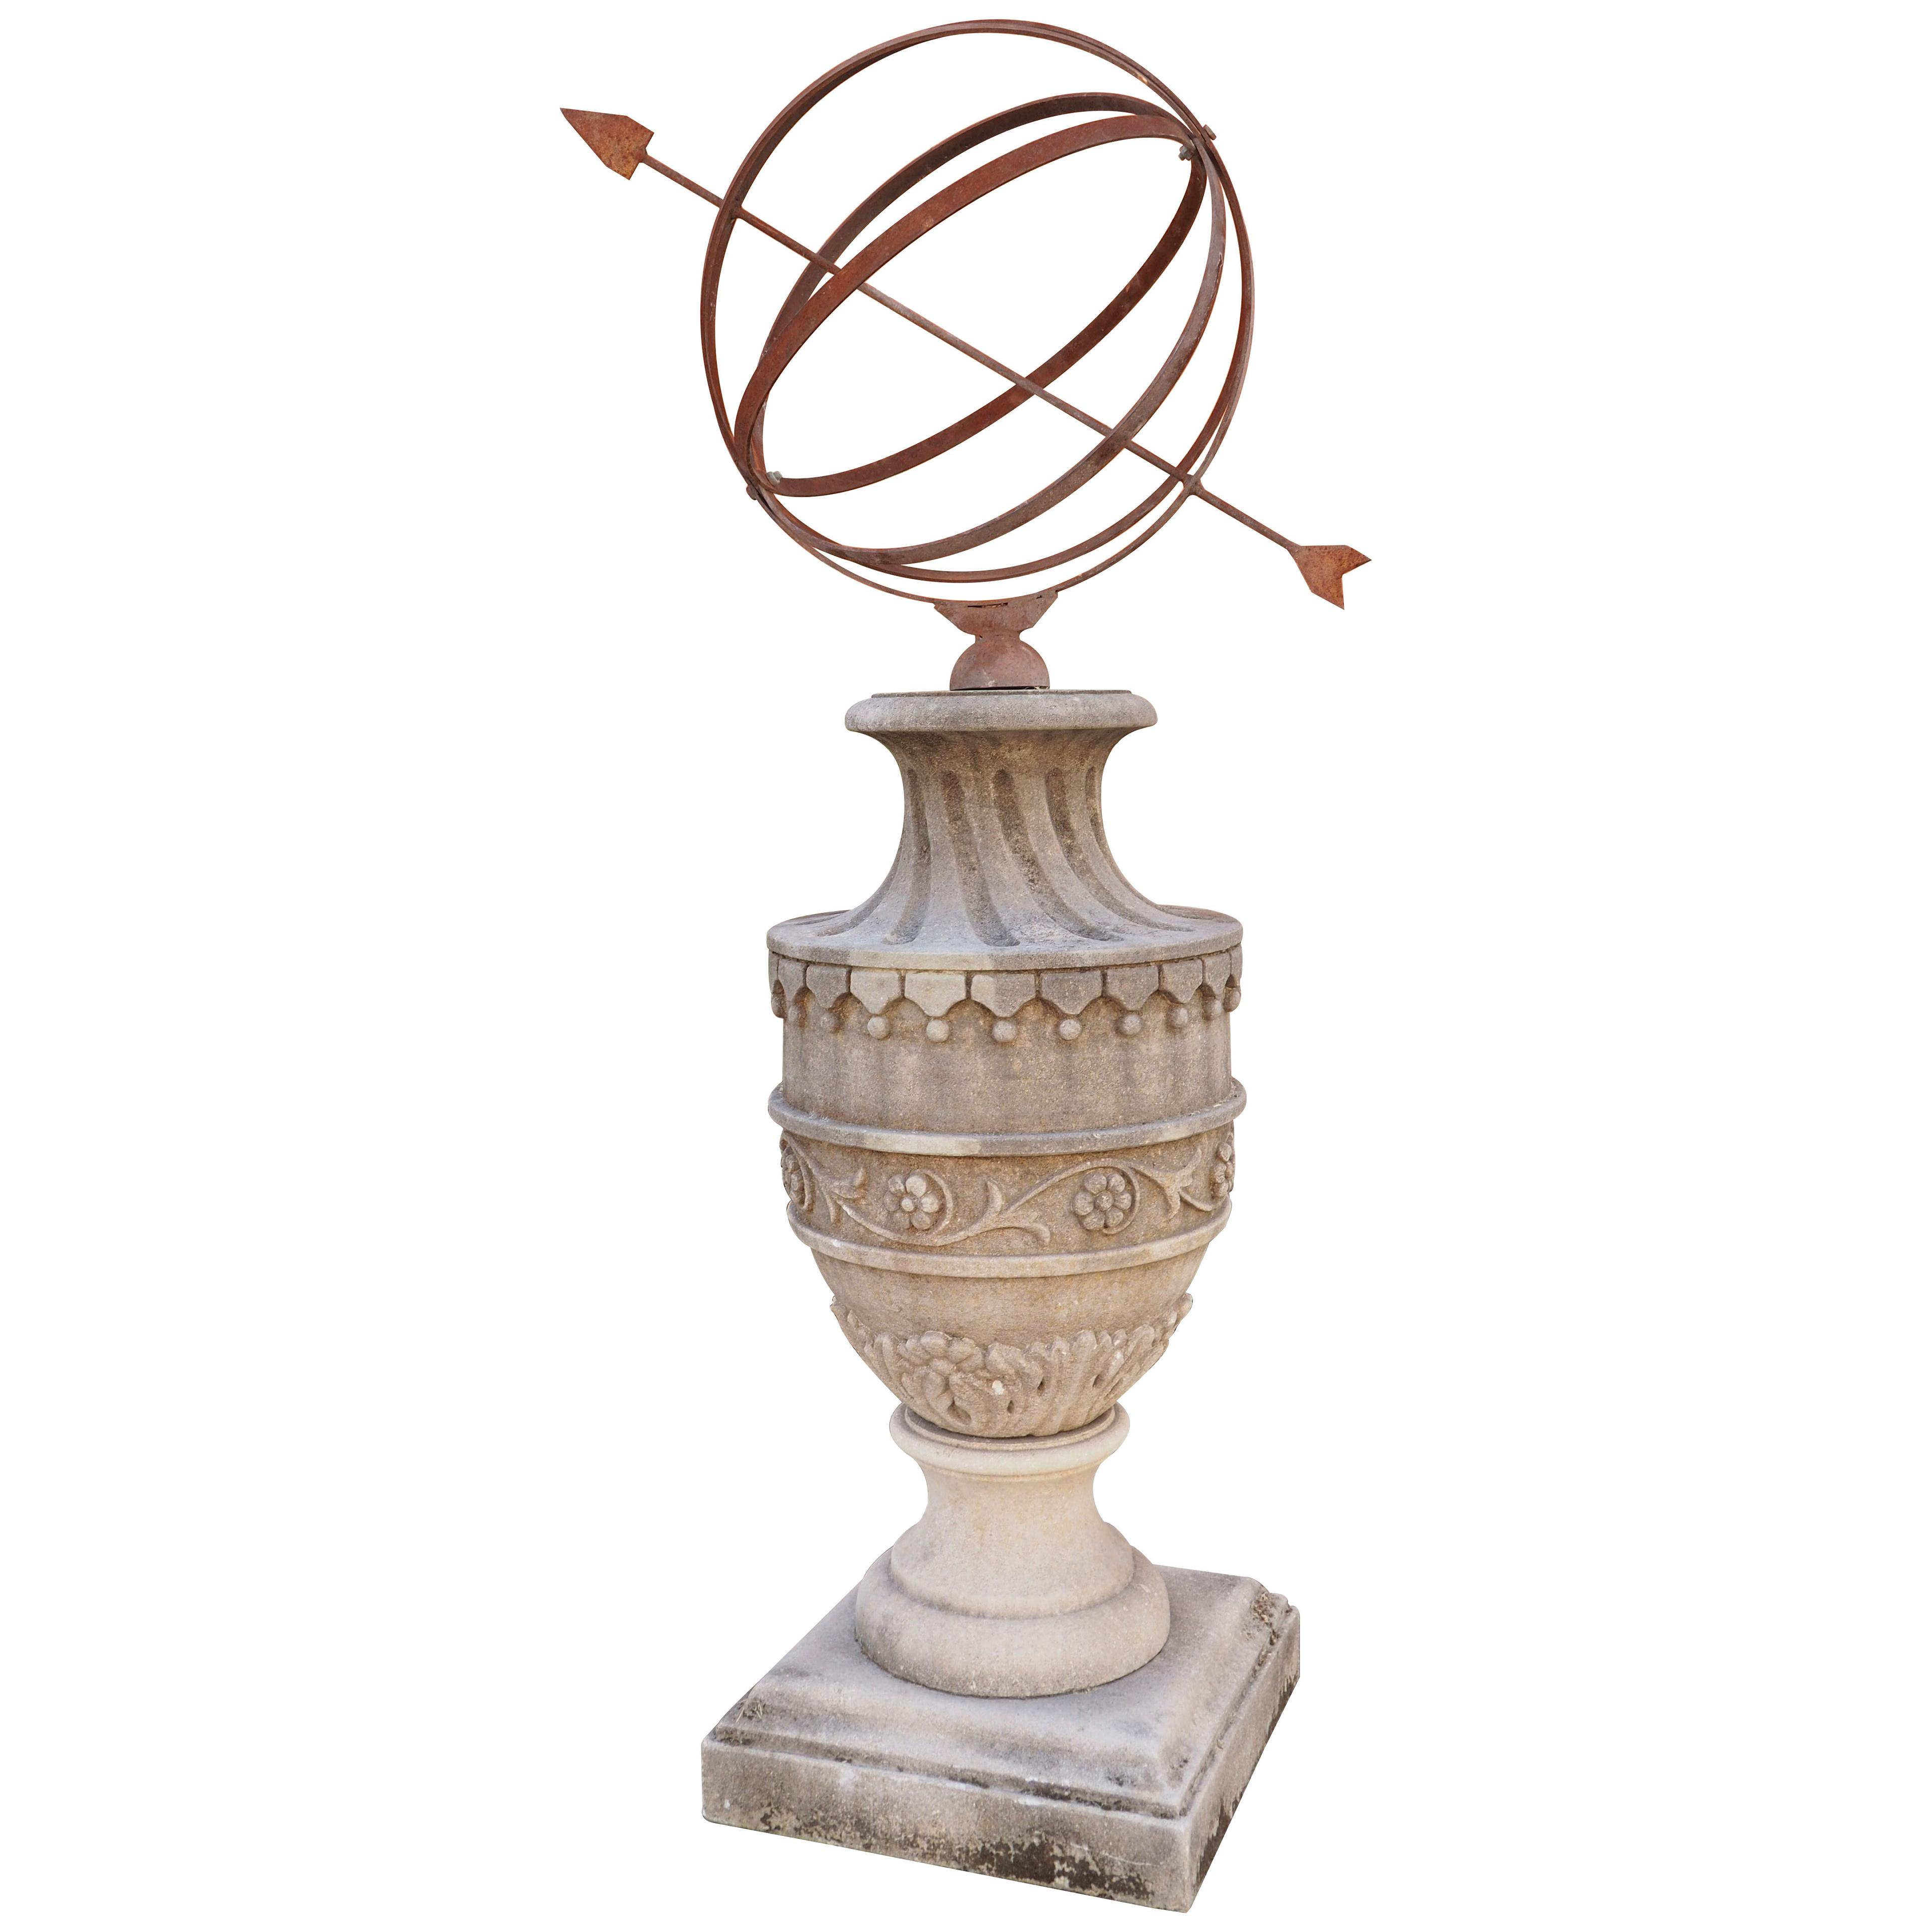 Limestone Garden Armillary Sundial with Carved Tassels and Floral/Foliate Motifs